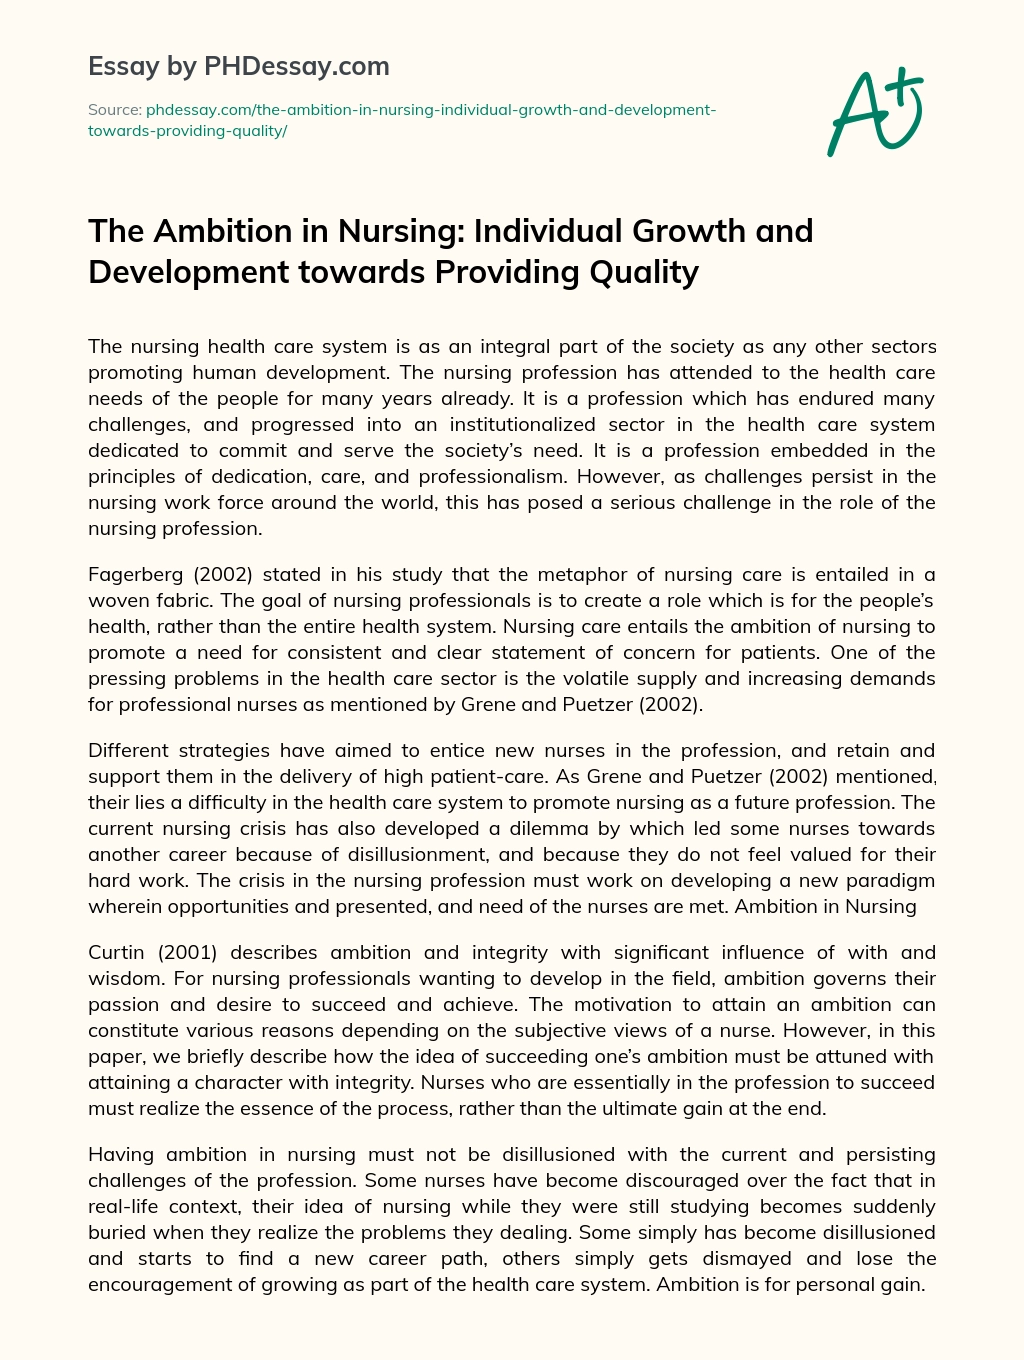 The Ambition in Nursing: Individual Growth and Development towards Providing Quality essay